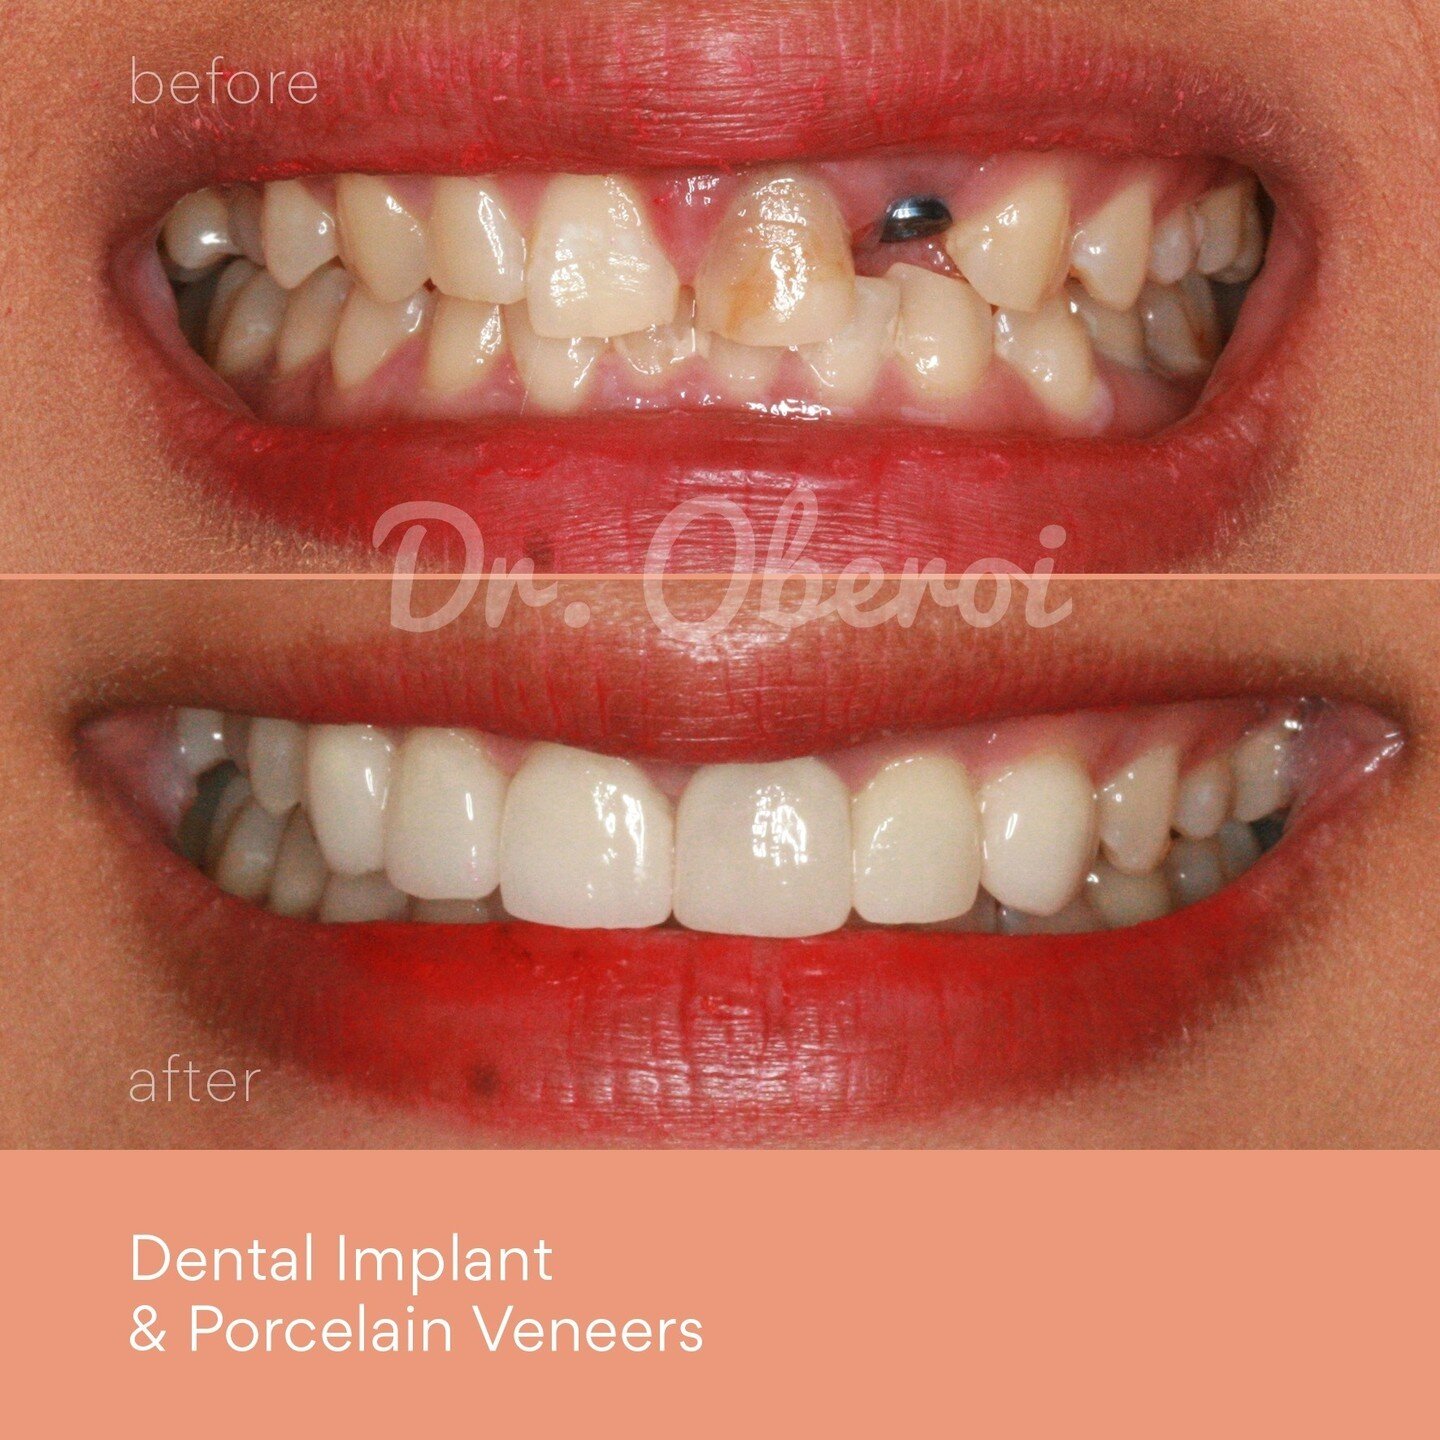 A brand new #smiletransformation from Dr Oberoi! ✨ With advancements in dental technology and materials, patients can achieve a natural-looking smile transformation that boosts confidence and improves overall oral health.⁠
⁠
🦷 Dental Implant &amp; P